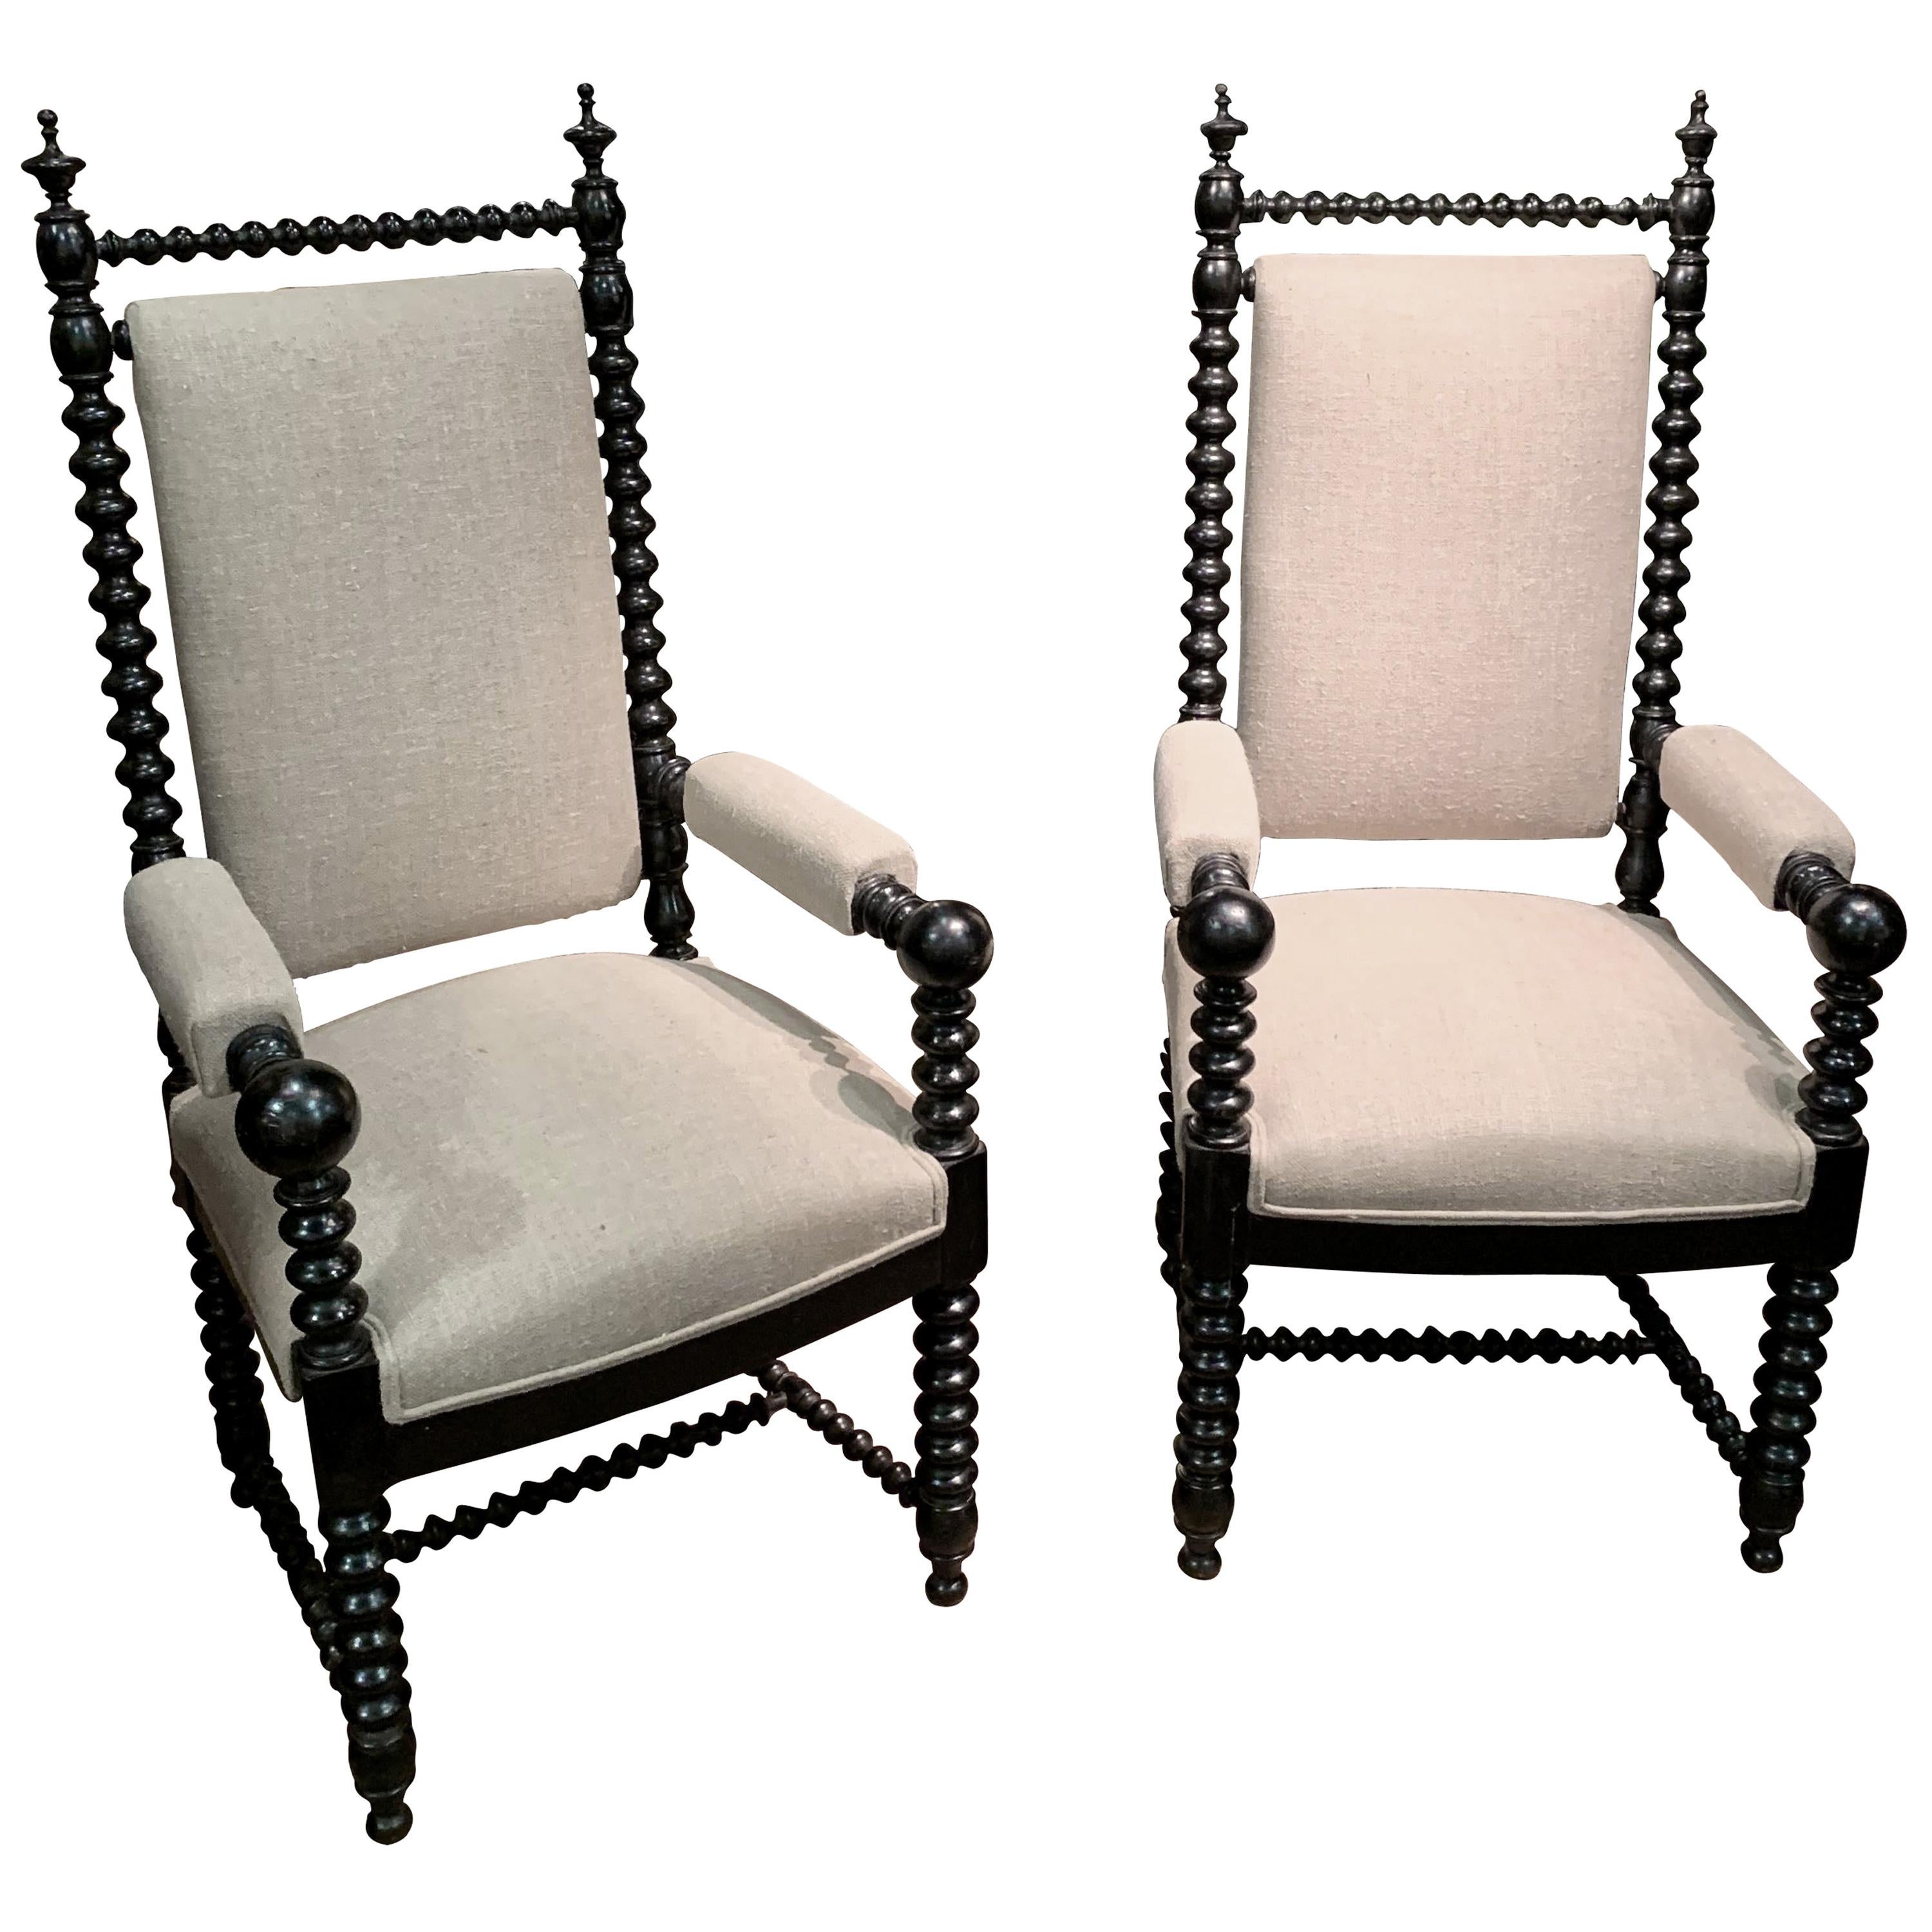 Pair of Upholstered Spindle Frame, Ball Armchairs, France, 19th Century